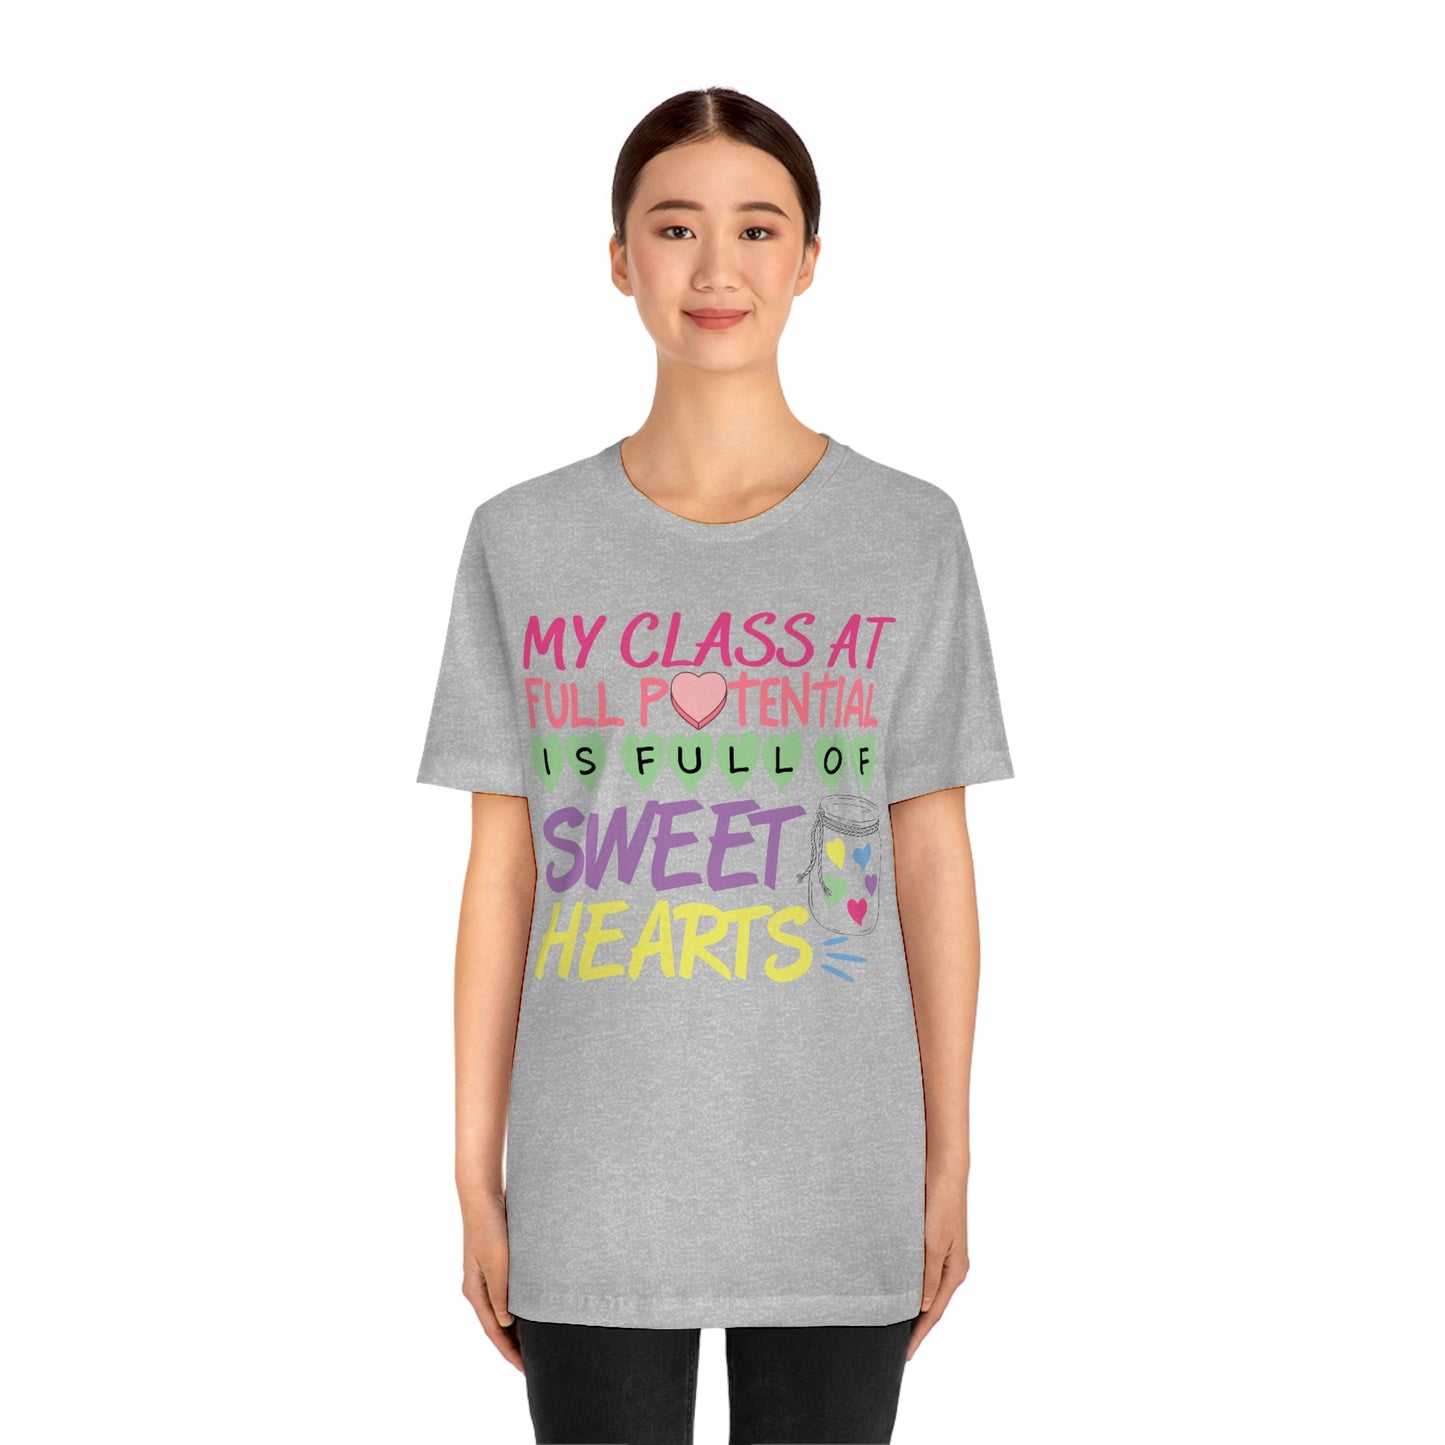 My Class At Full Potential Is Full Of Sweet Hearts Shirt